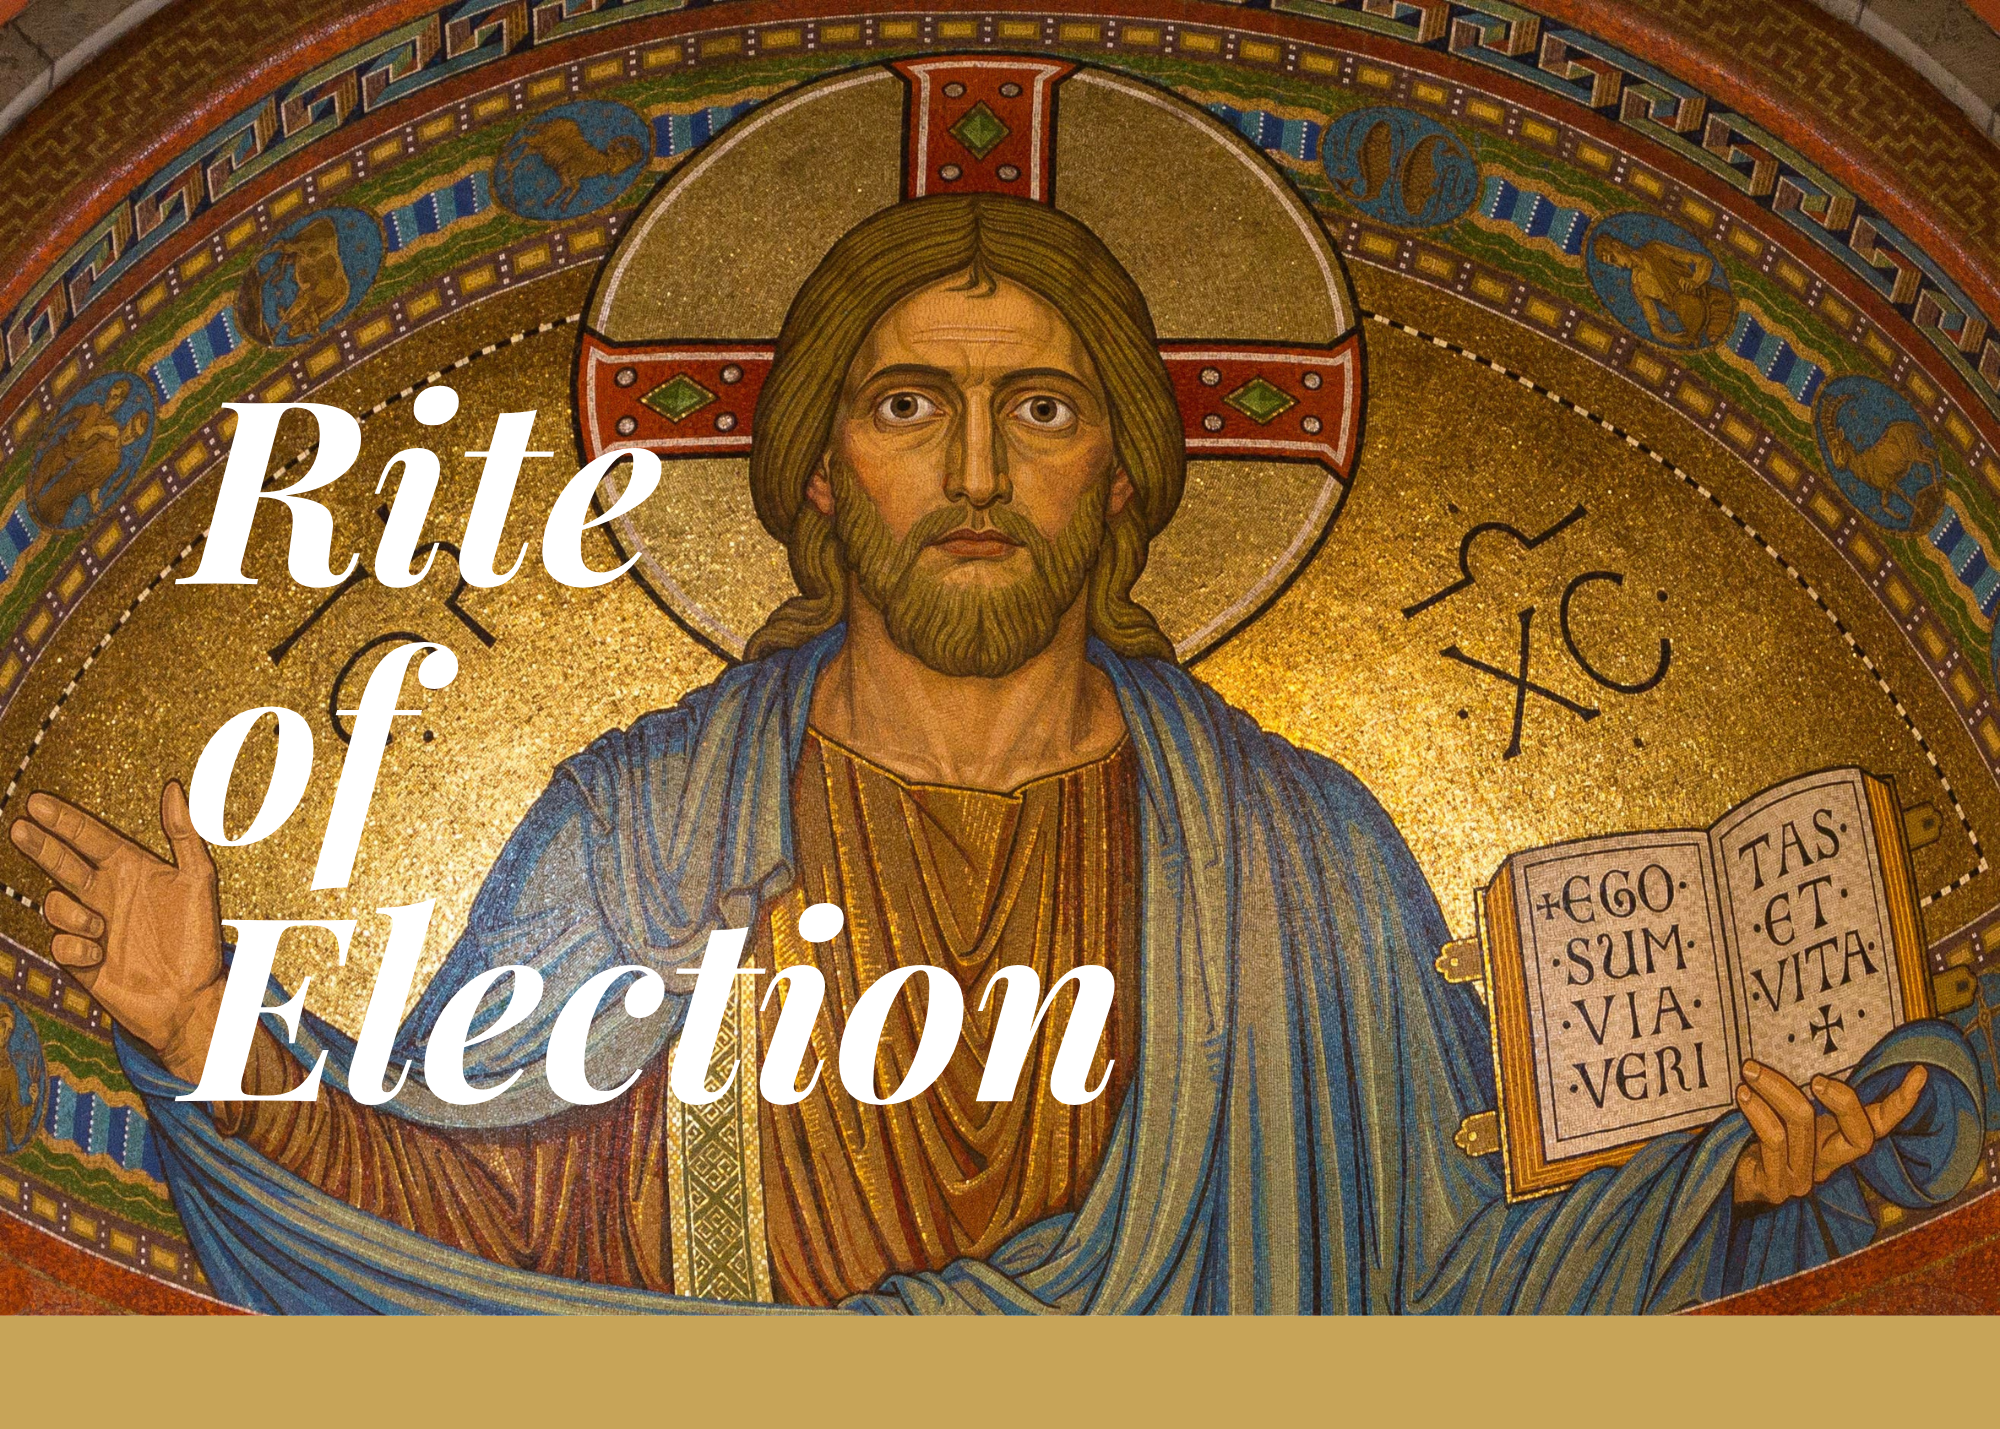 Rite of Election-Imperial Valley